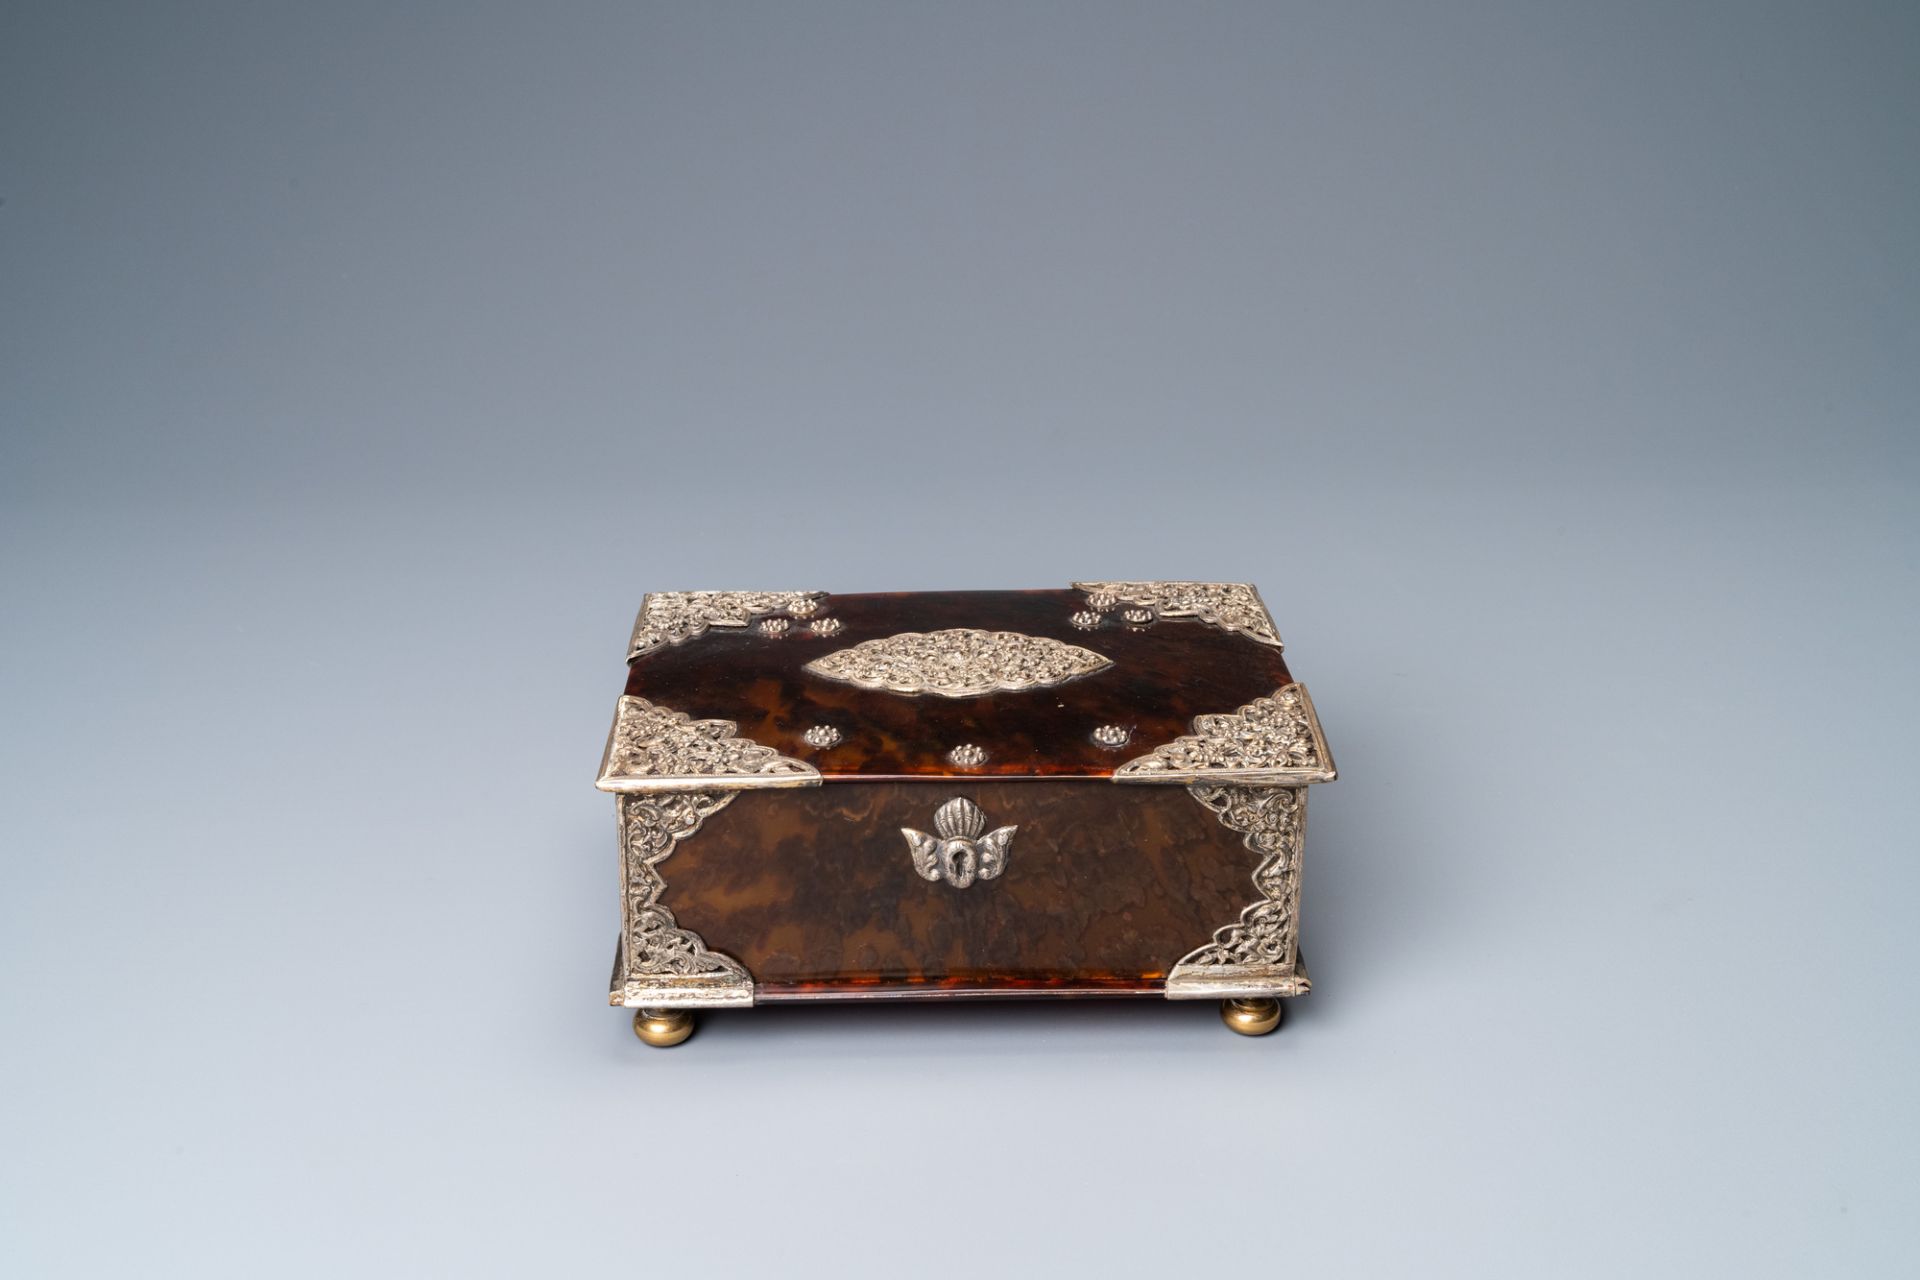 A Dutch colonial silver-mounted tortoise shell sirih casket, ca. 1700 - Image 3 of 10